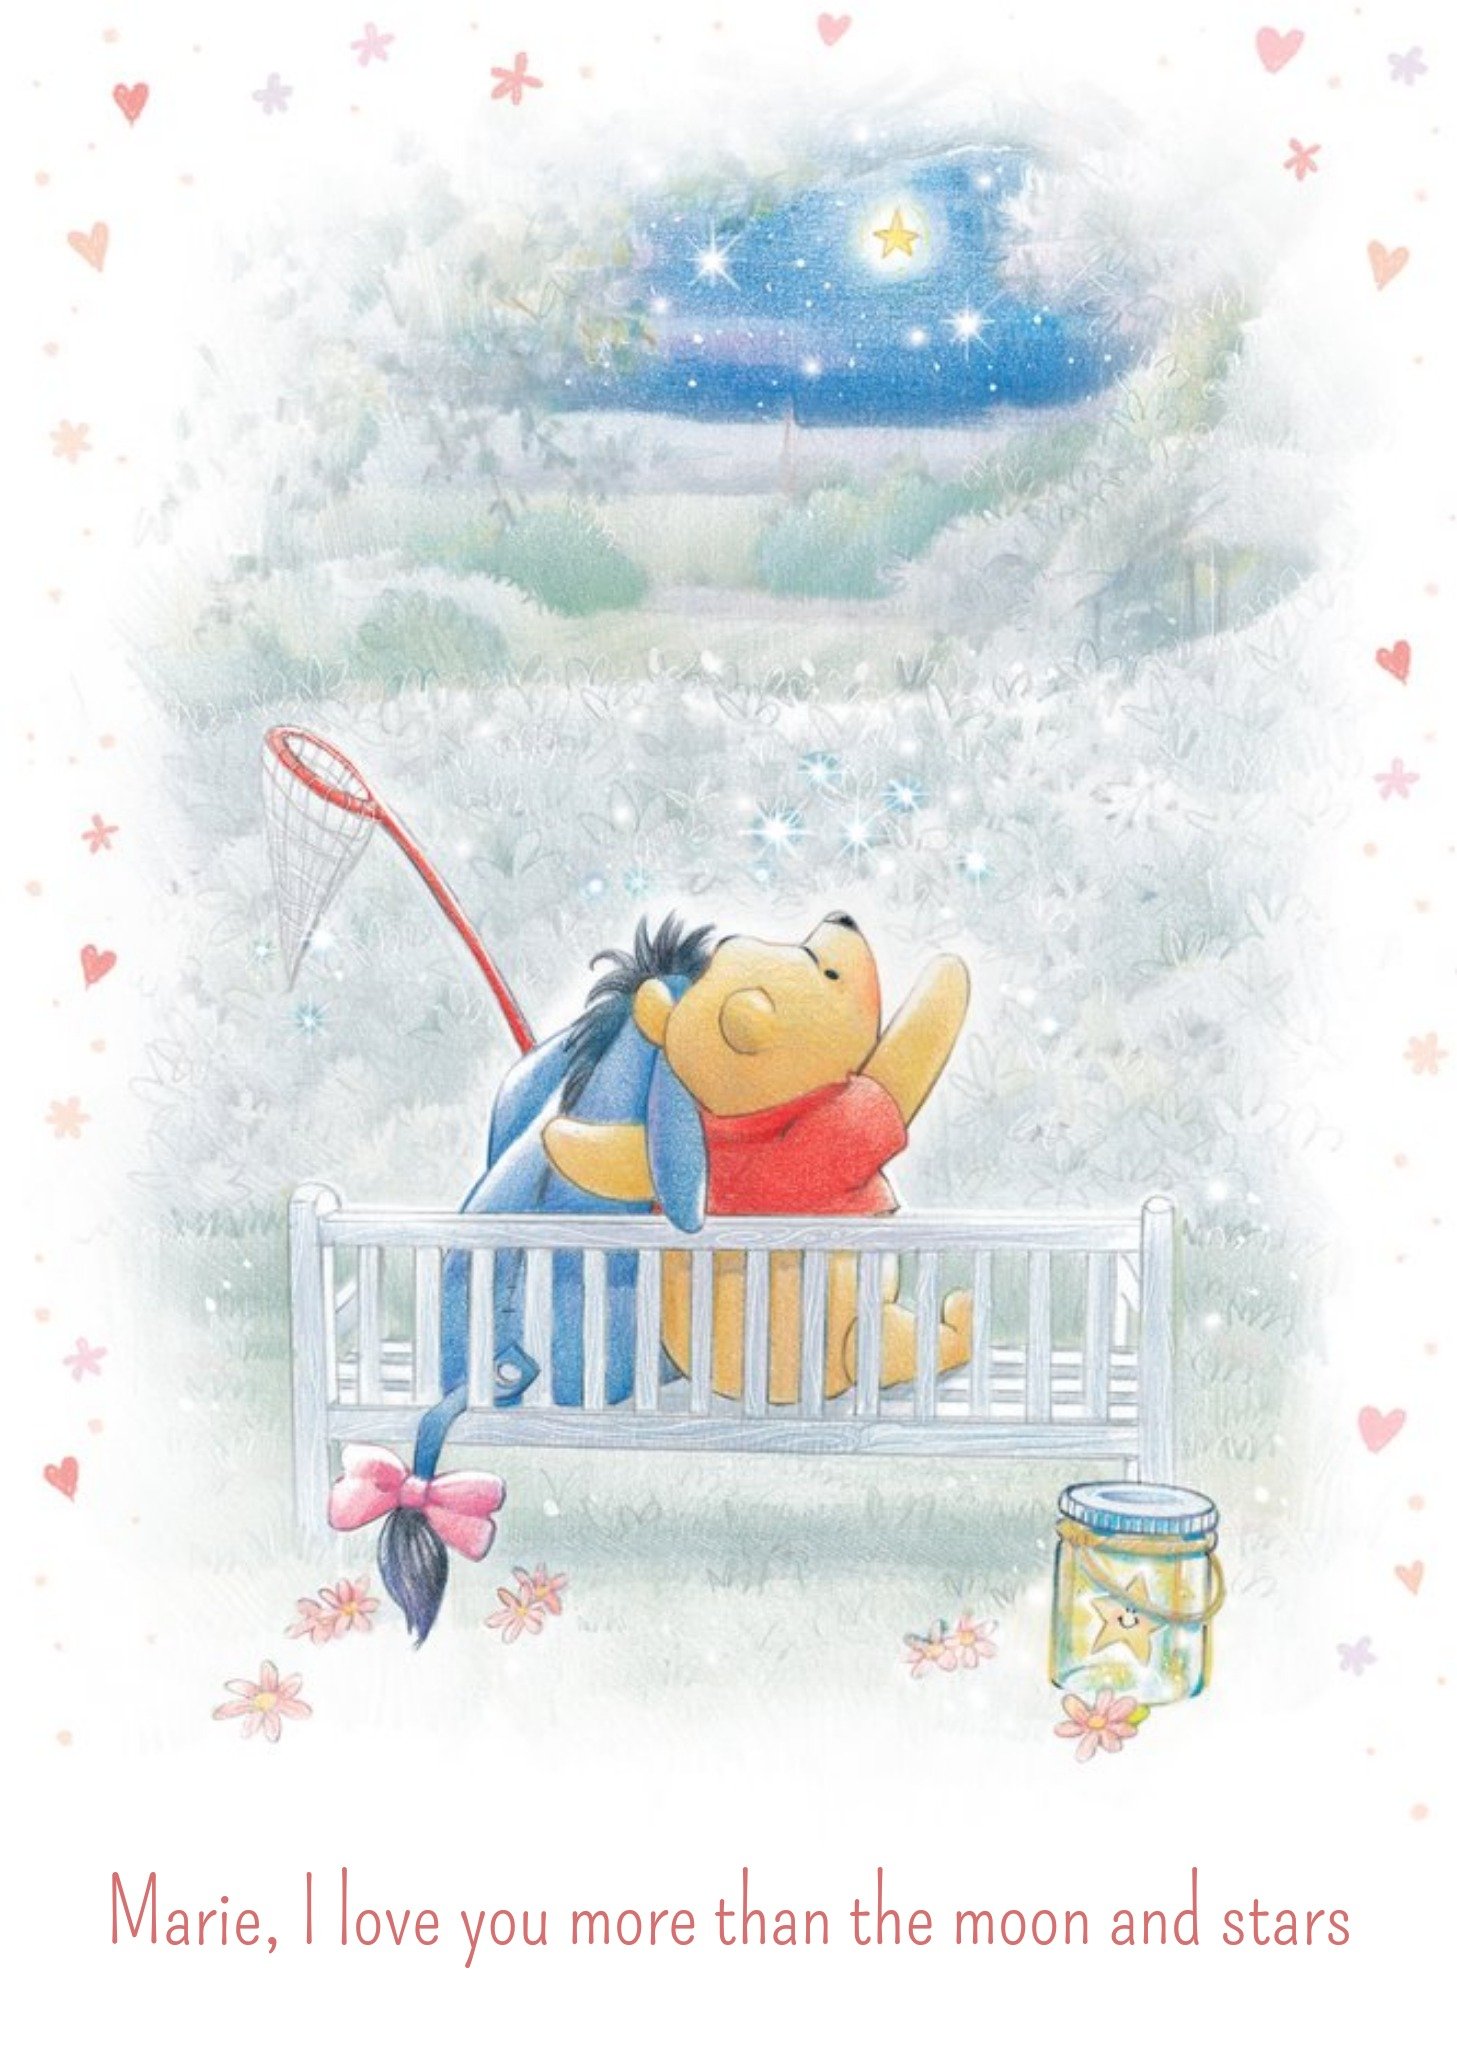 Disney Winnie The Pooh Love You More Than The Moon And Stars Card Ecard